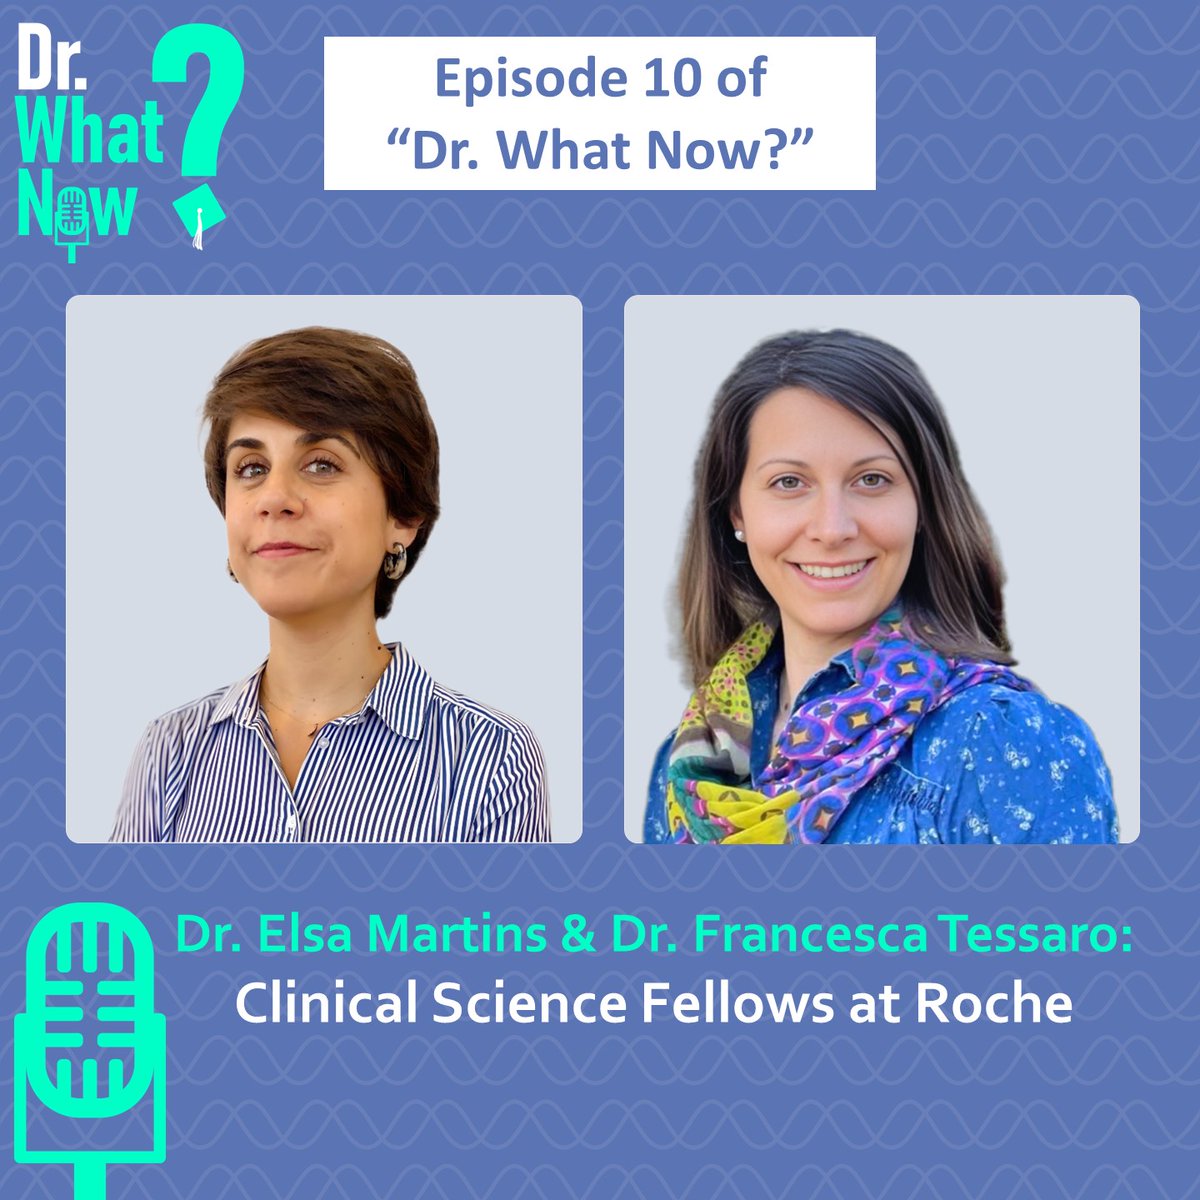 Episode 10 is out! 📣
Dr. Elsa Martins and Dr. Francesca Tessaro explain their roles as clinical scientists at Roche and their contributions to developing next generation medicines 🎧Listen the interview now: shorturl.at/bfiA8 #DrWhatNow #phdcareers #Drugdevelopent #Pharma